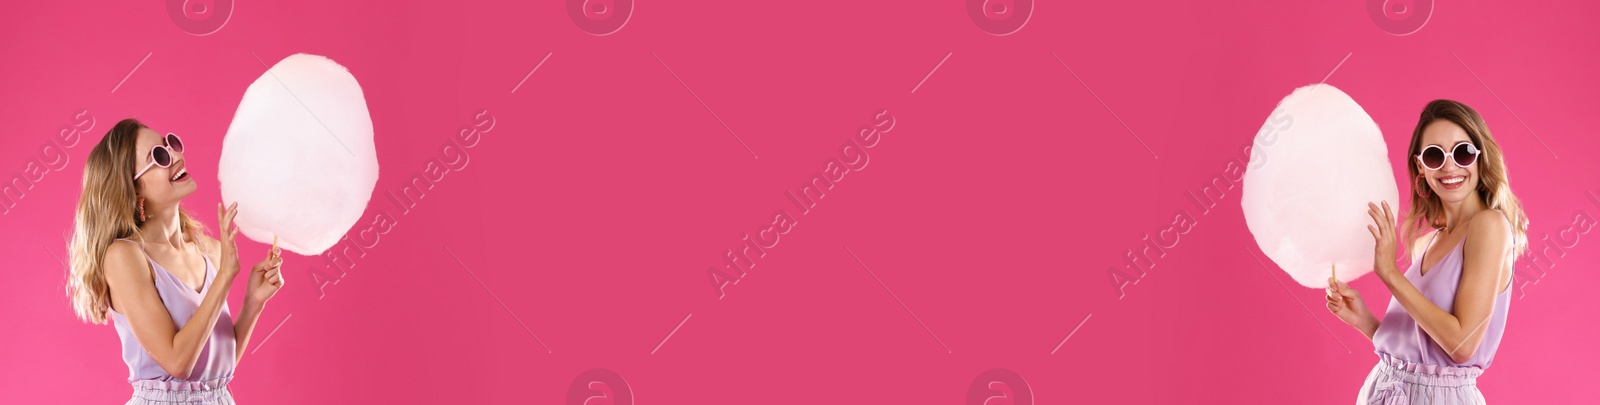 Image of Collage with photos of young woman holding cotton candy on bright pink background, space for text. Banner design